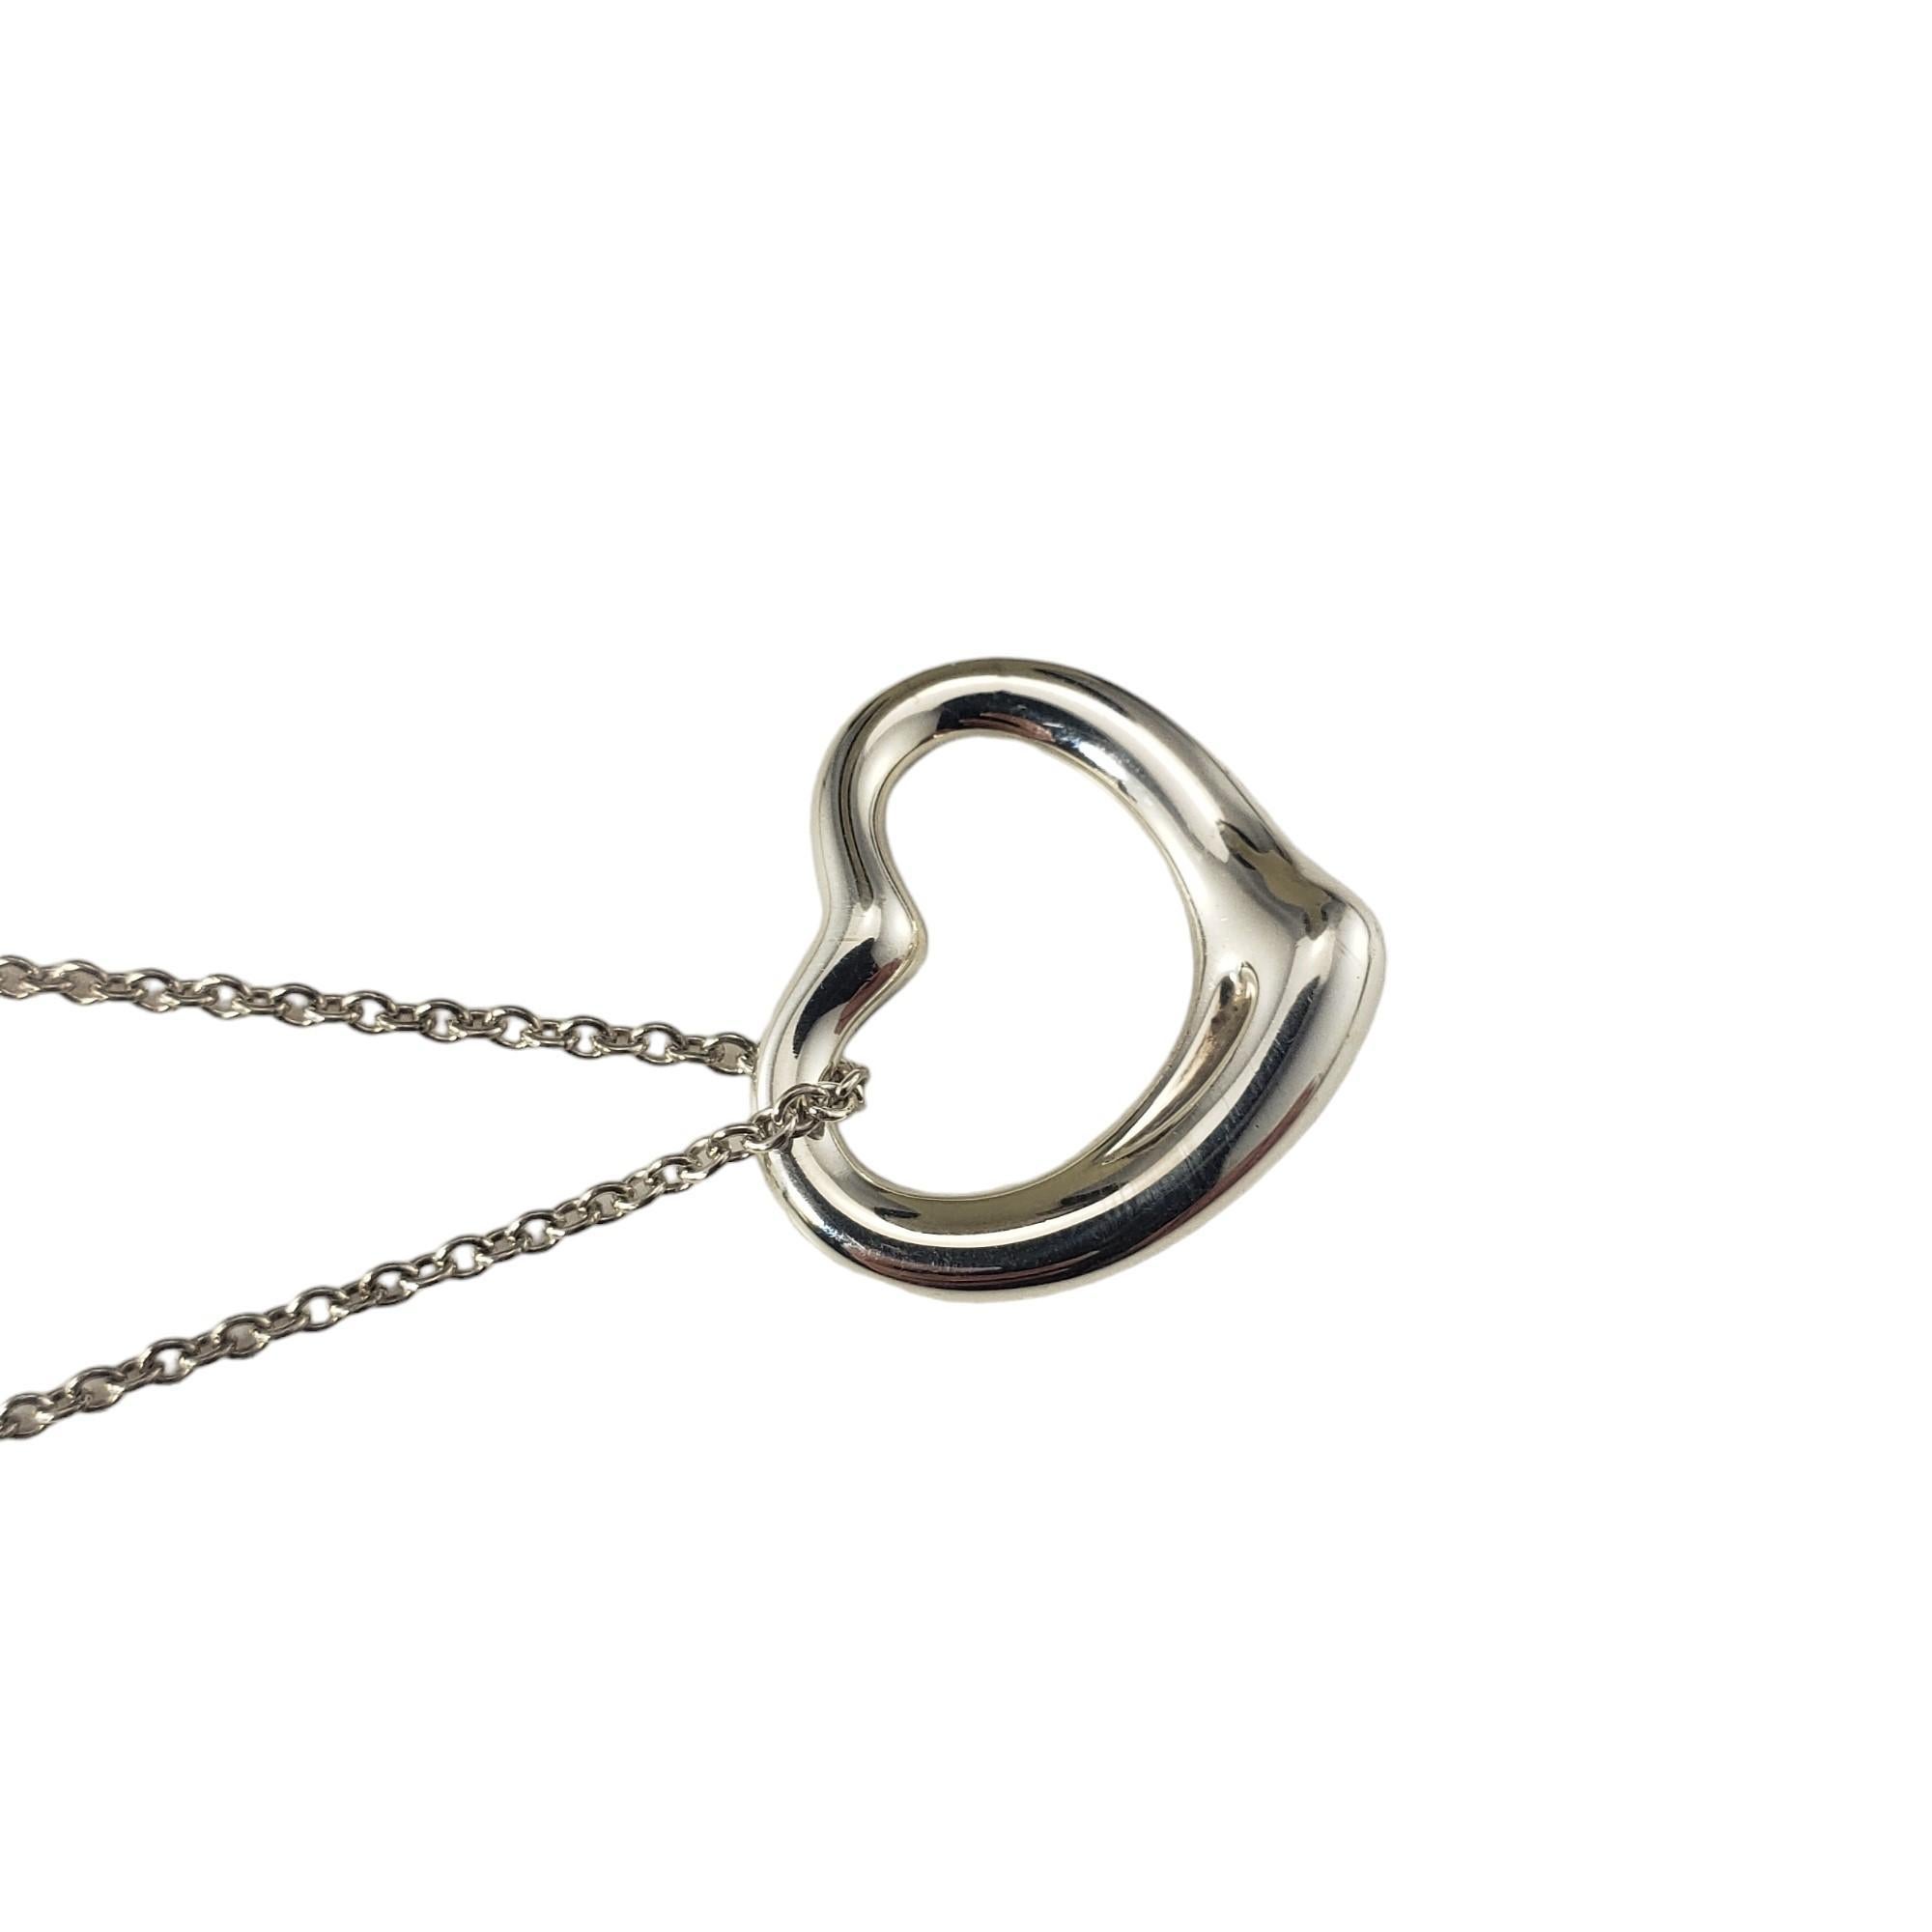 Tiffany & Co. Elsa Peretti Sterling Silver Open Heart Necklace #16845 In Good Condition For Sale In Washington Depot, CT